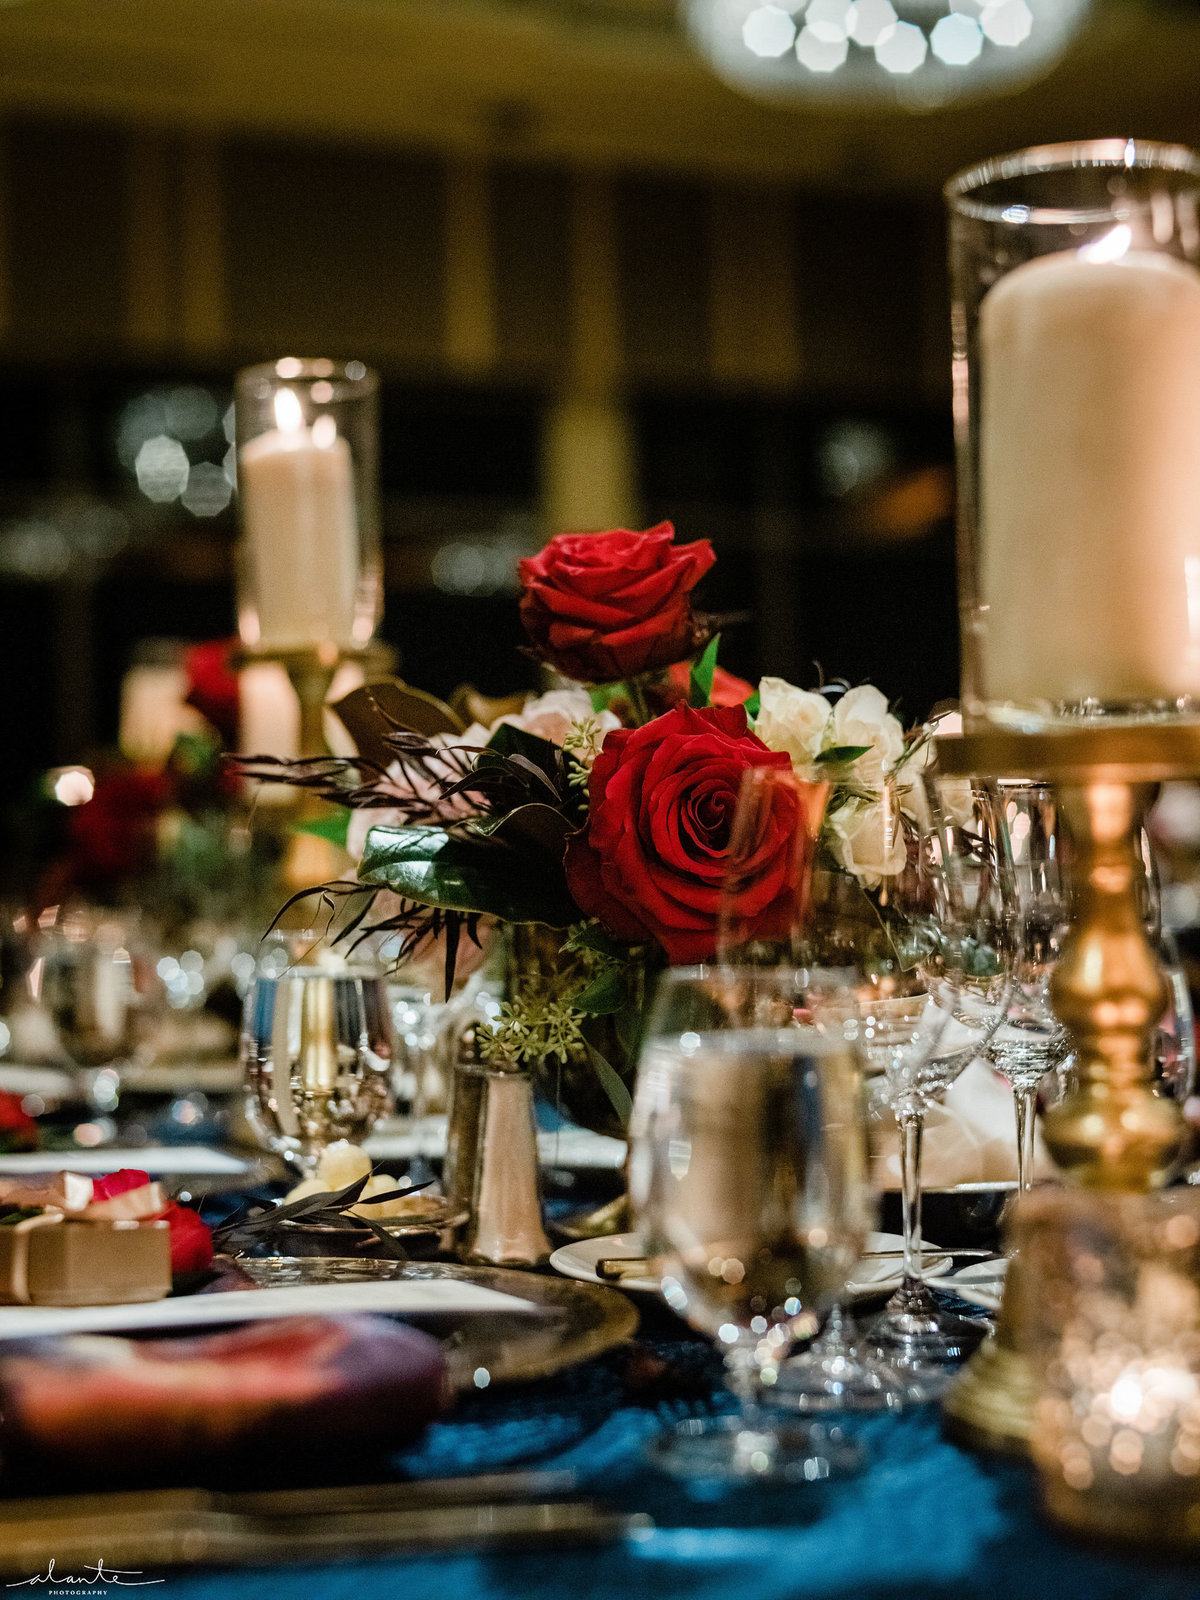 floral centerpiece detail with red roses and hurricane candles